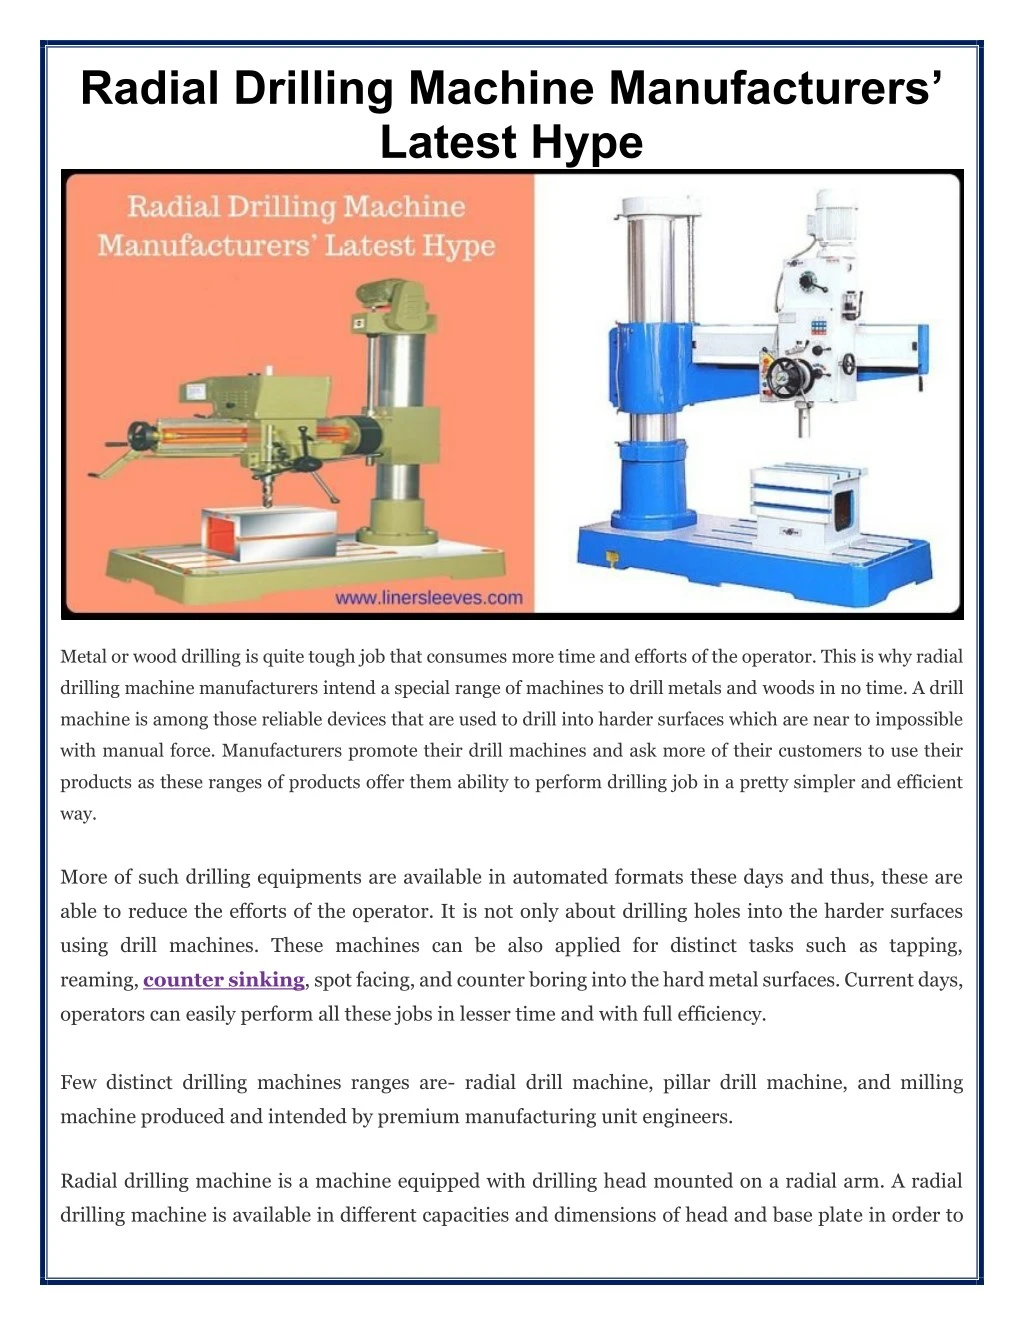 radial drilling machine manufacturers latest hype